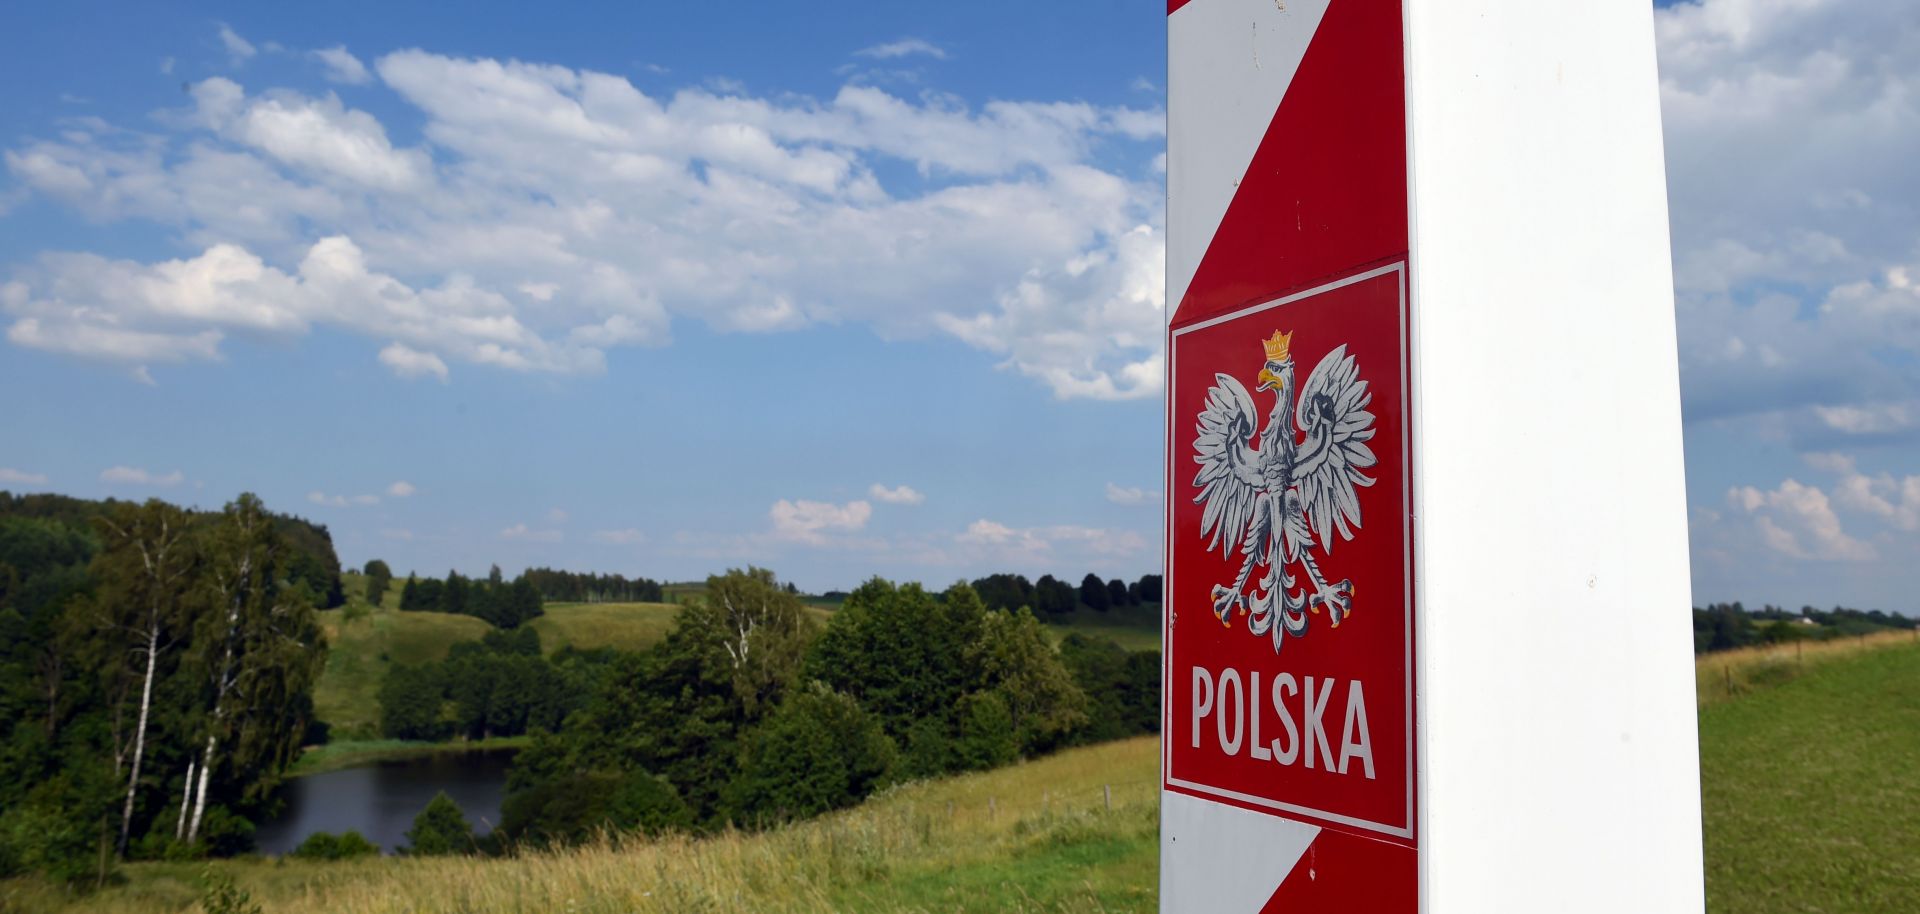 A Polish border post marks the NATO nation's frontier with alliance partner Lithuania and Russia's Kaliningrad region.